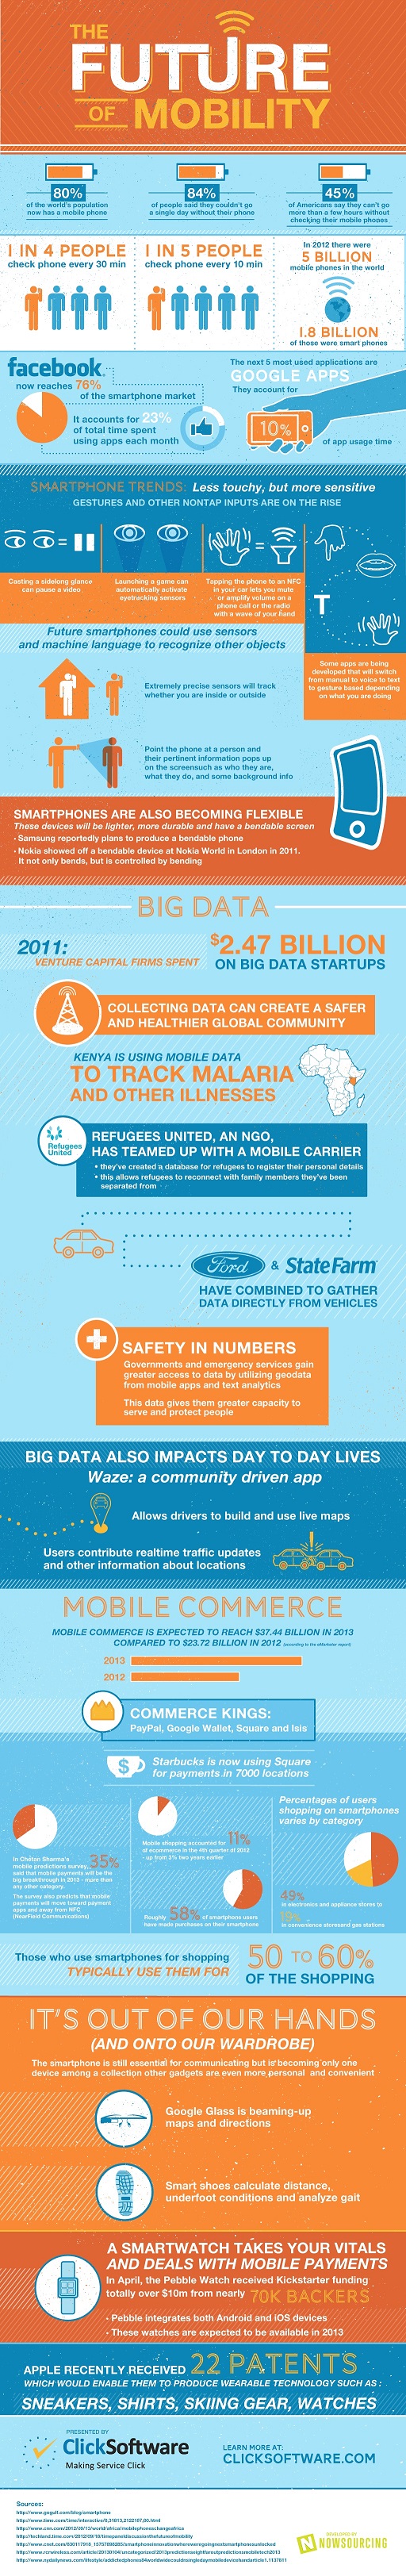 future-of-mobility-infographic